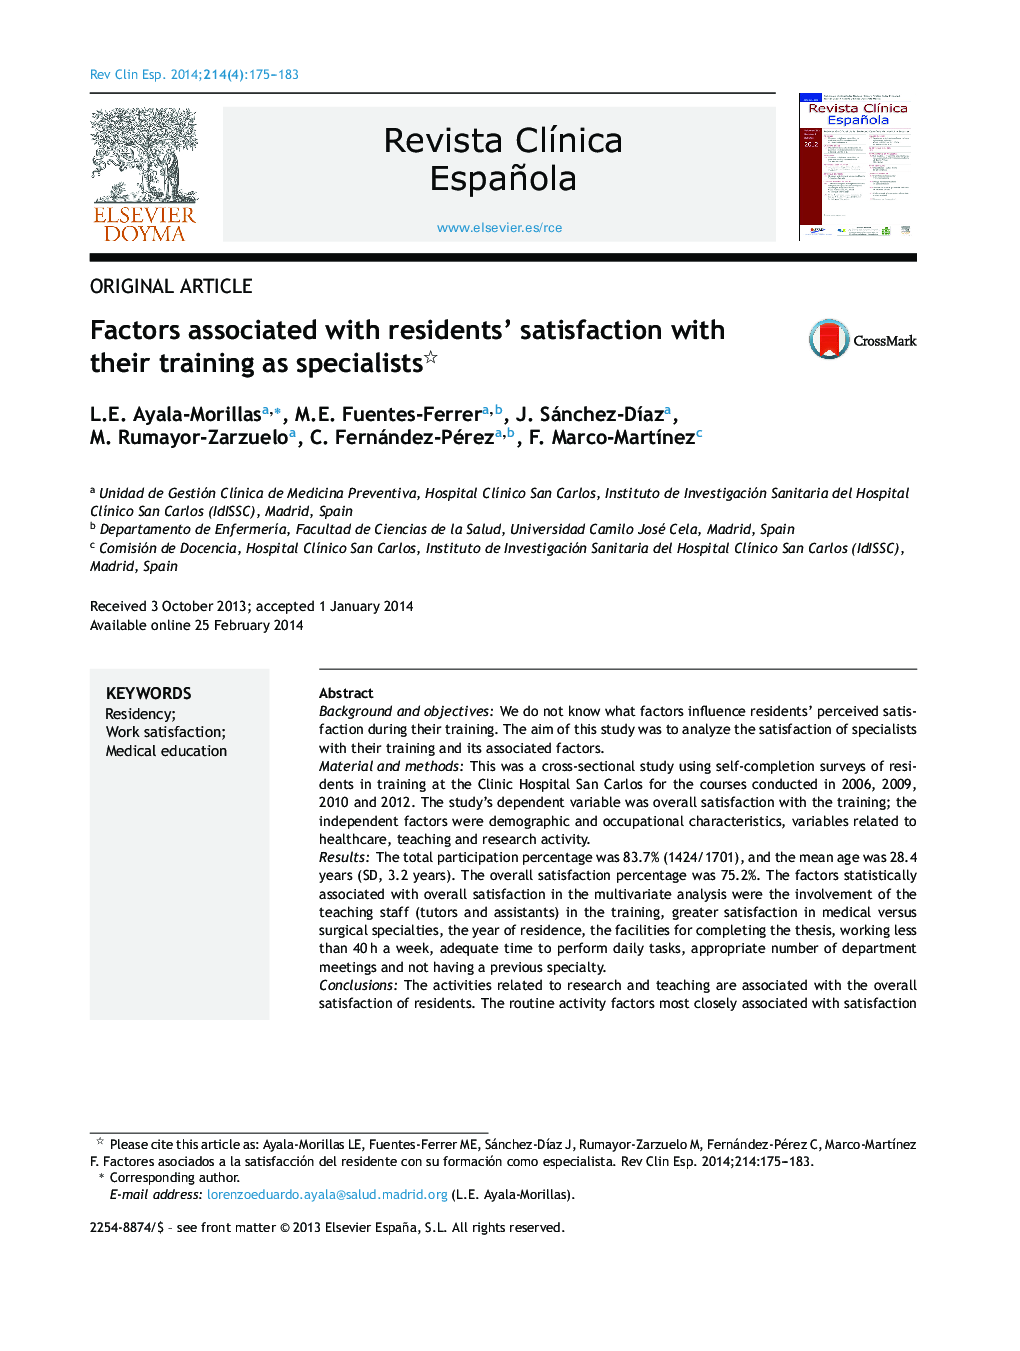 Factors associated with residents’ satisfaction with their training as specialists 